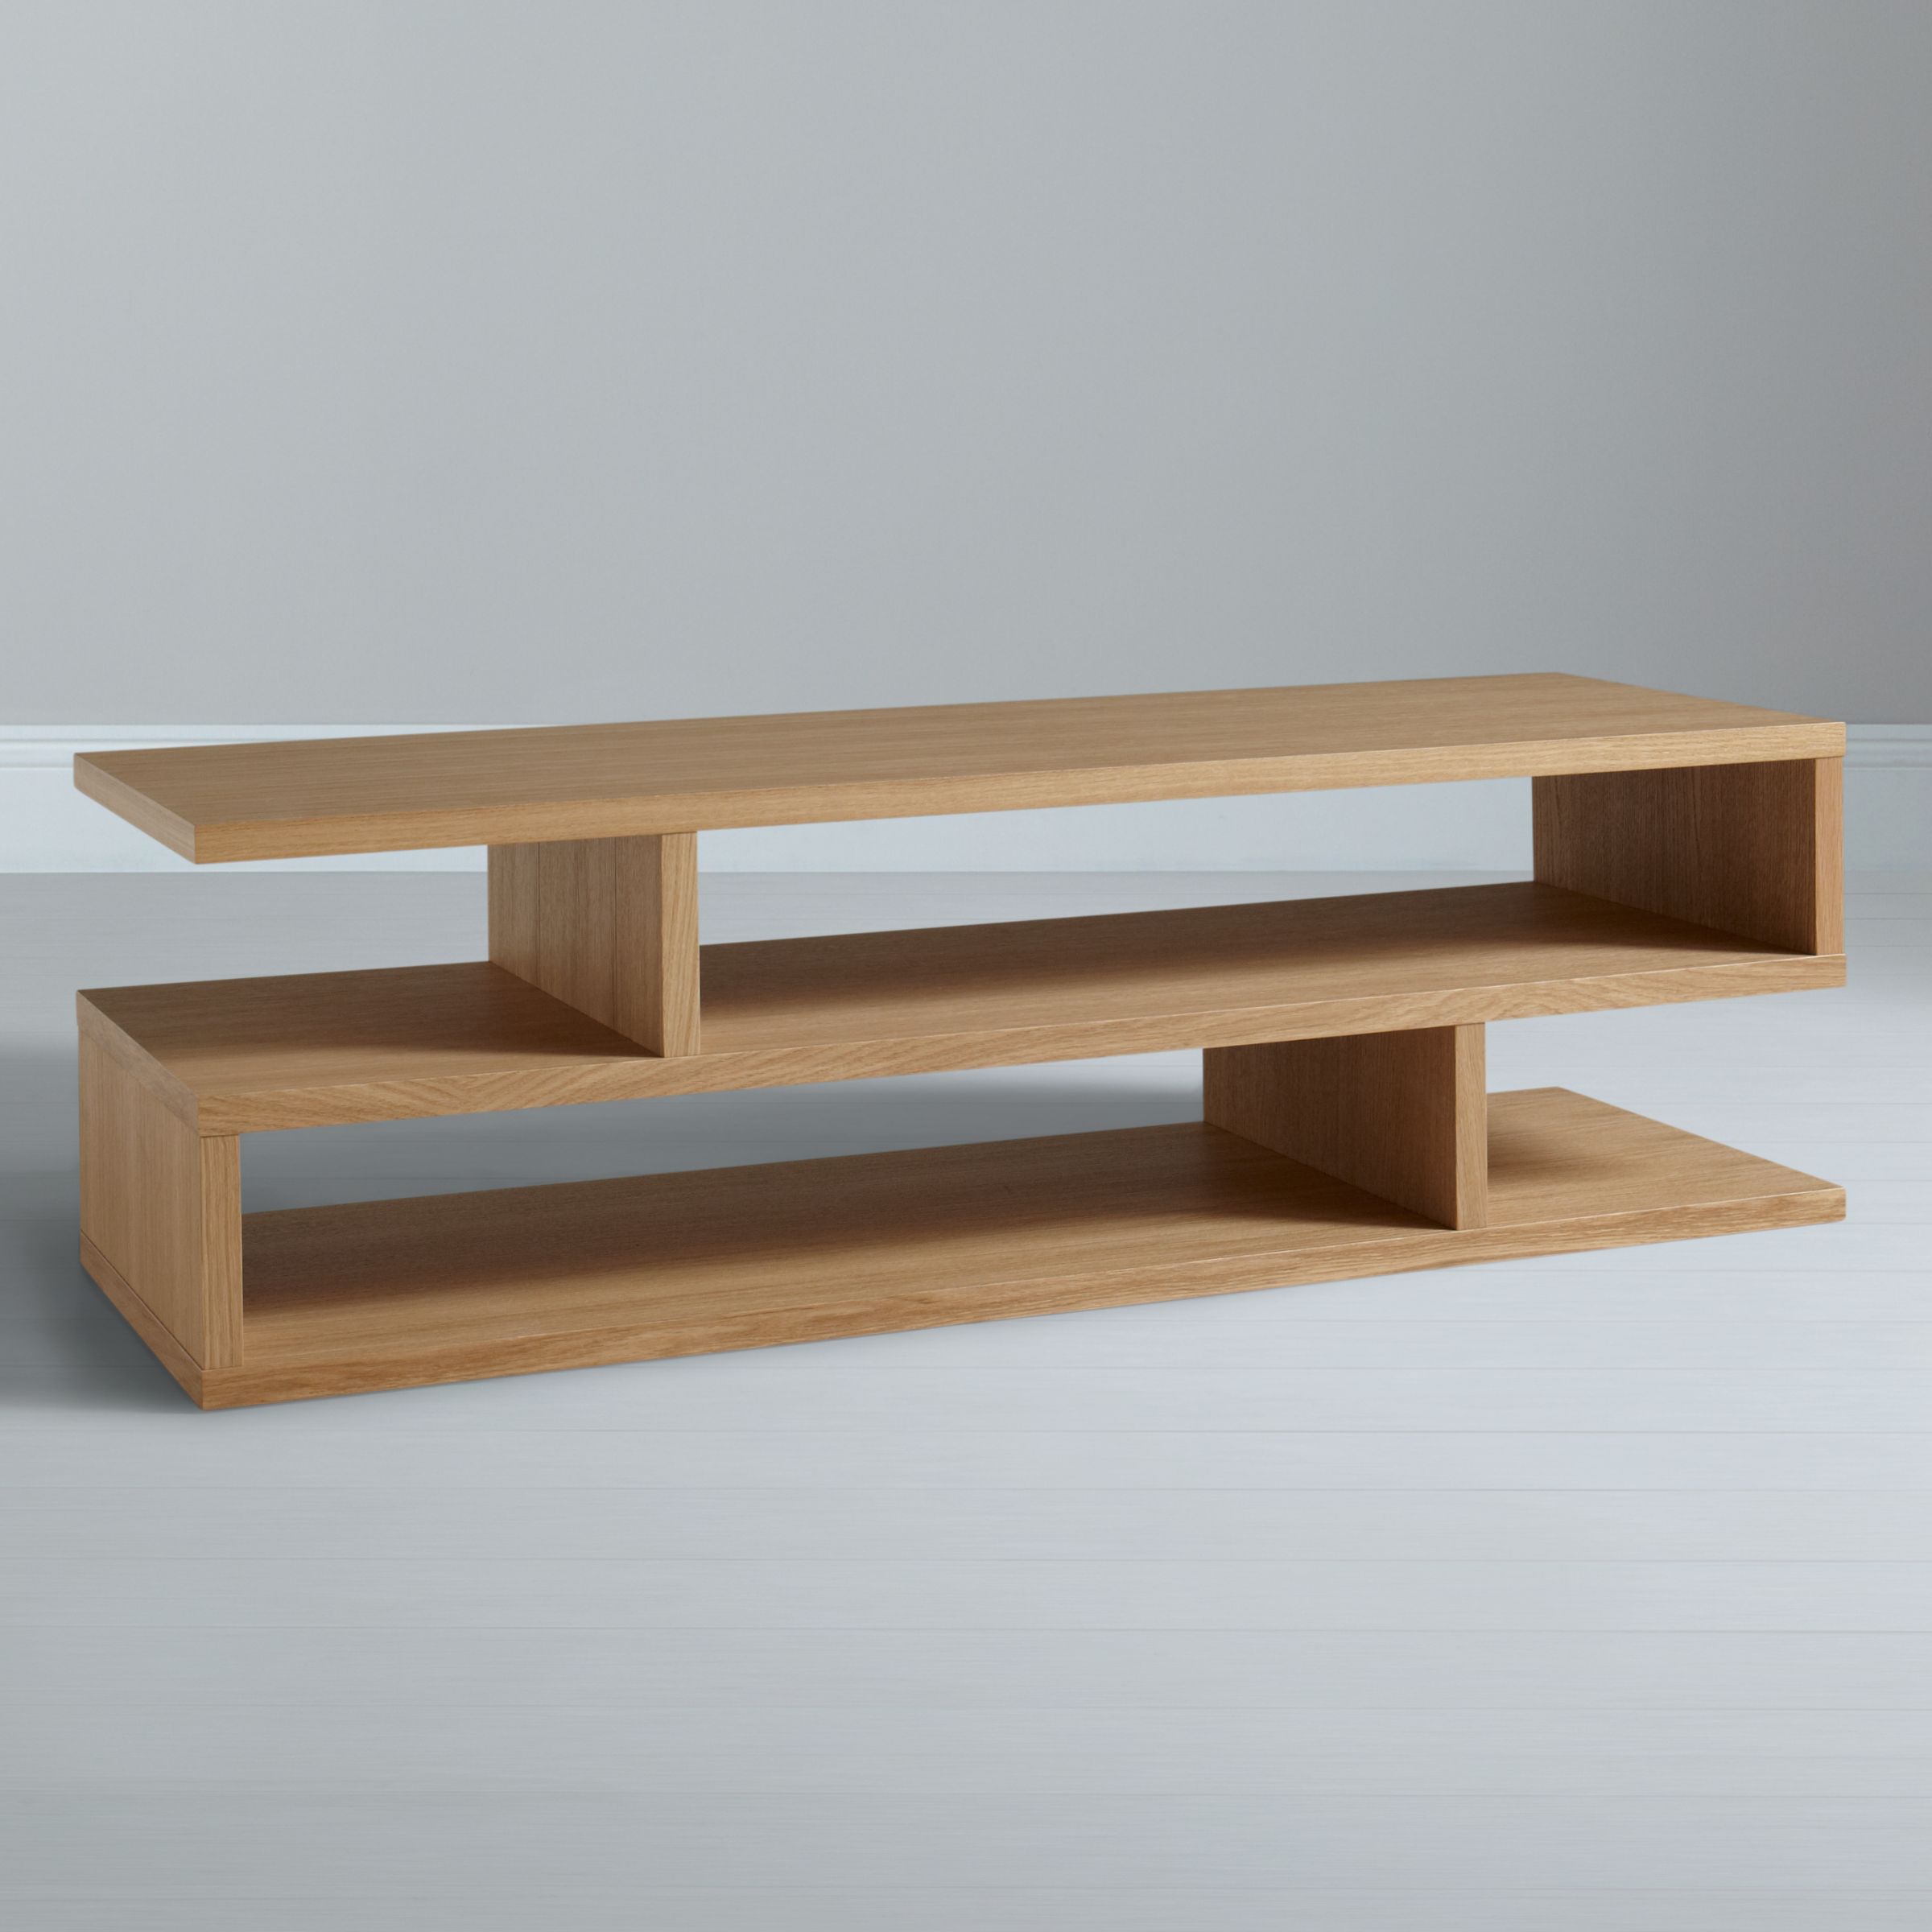 Content by Conran Balance Coffee Table, Oak at John Lewis